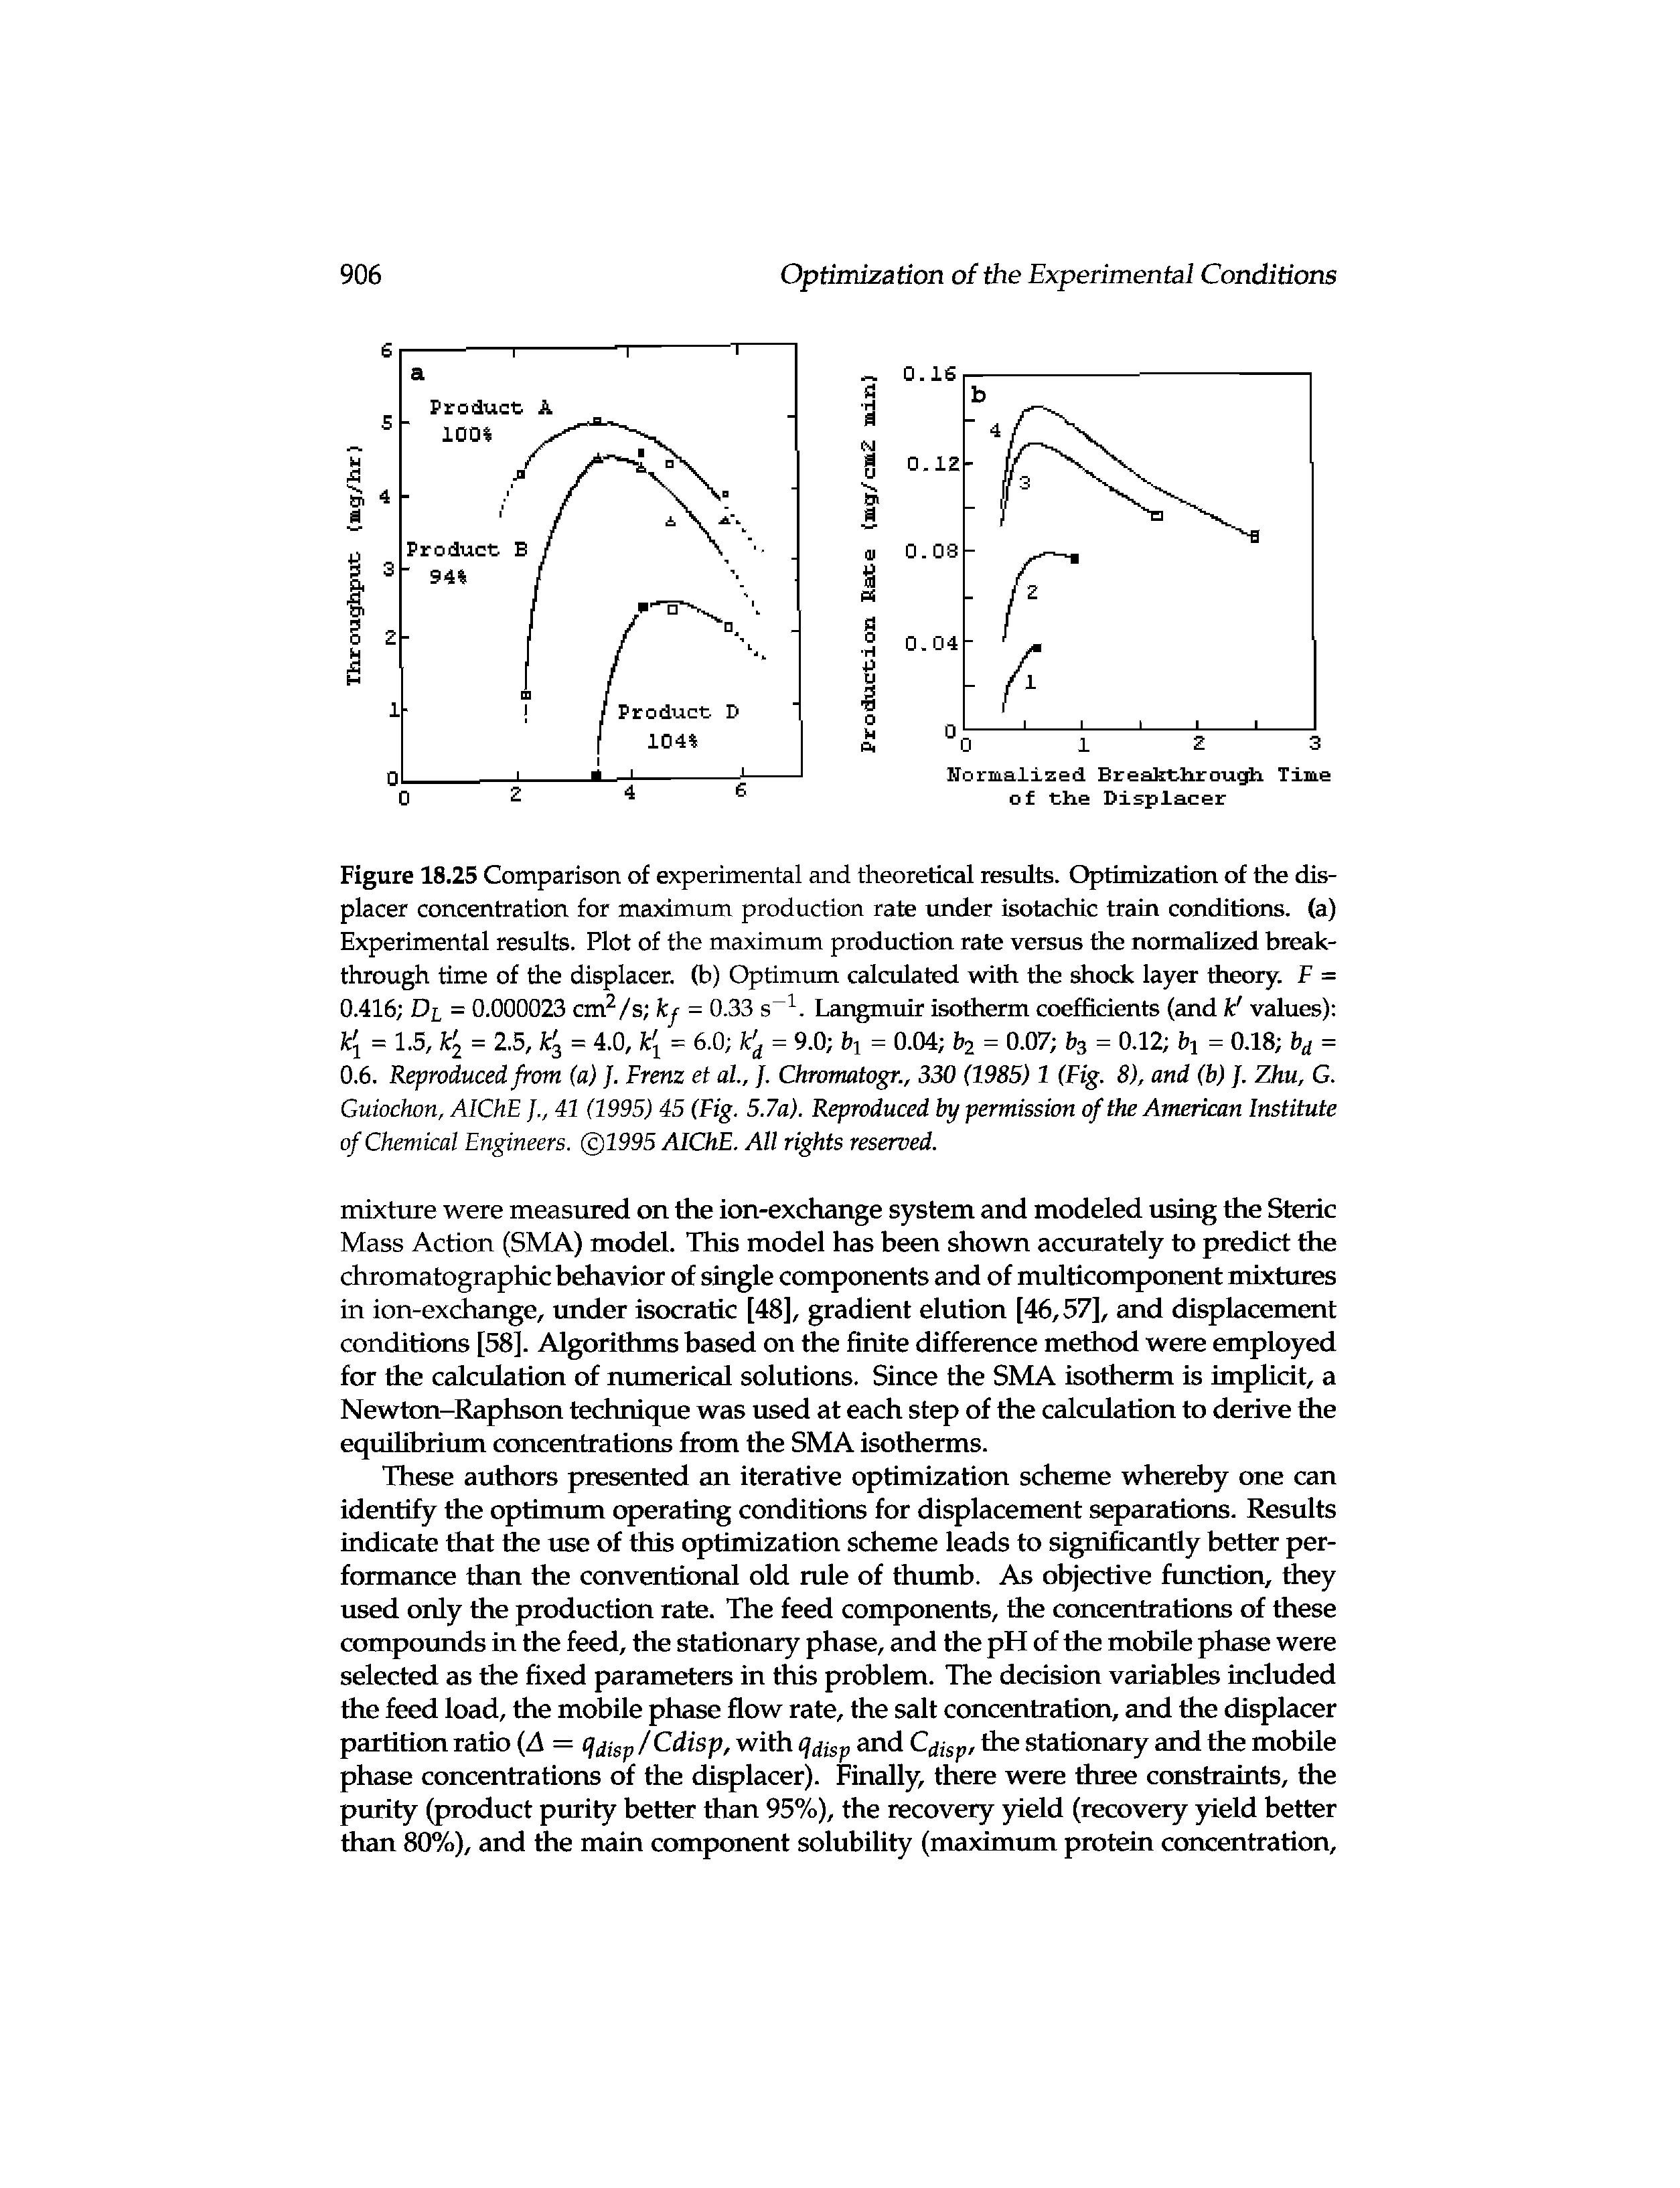 Figure 18.25 Comparison of experimental and theoretical results. Optimization of the dis-placer concentration for maximum production rate xmder isotachic train conditions, (a) Experimental results. Plot of the maximum production rate versus the normalized breakthrough time of the displacer, (b) Optimum calculated with the shock layer theory. F = 0.416 Dl = 0.000023 cm /s fcy = 0.33 s. Langmuir isotherm coefficients (and k values) k y = 1.5, = 2.5, k 2 = 4.0, = 6.0 k = 9.0 = 0.04 bz = 0.07 bg = 0.12 bi = 0.18 b =...